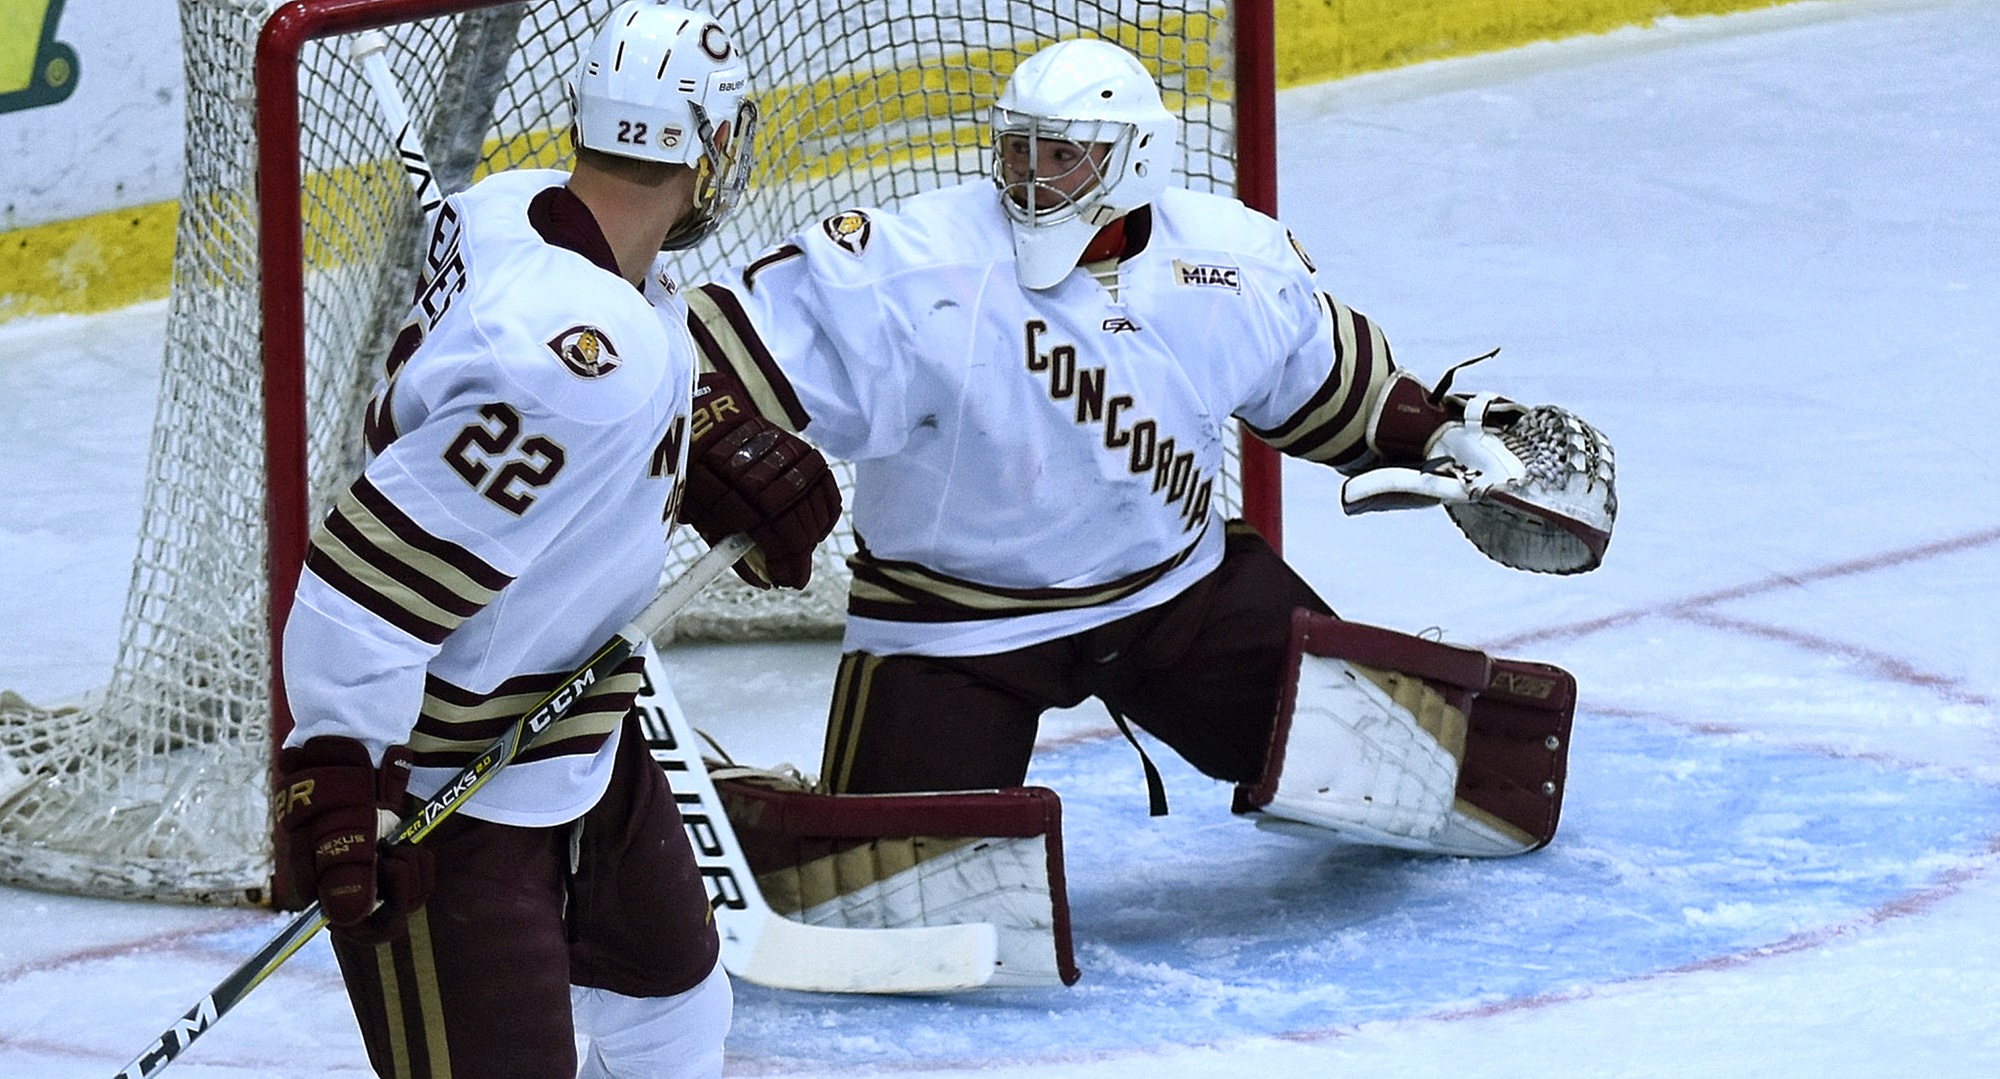 Junior goalie Jacob Stephan made 27 saves to earn his second shutout of the season in the Cobbers' series-finale win at Bethel.